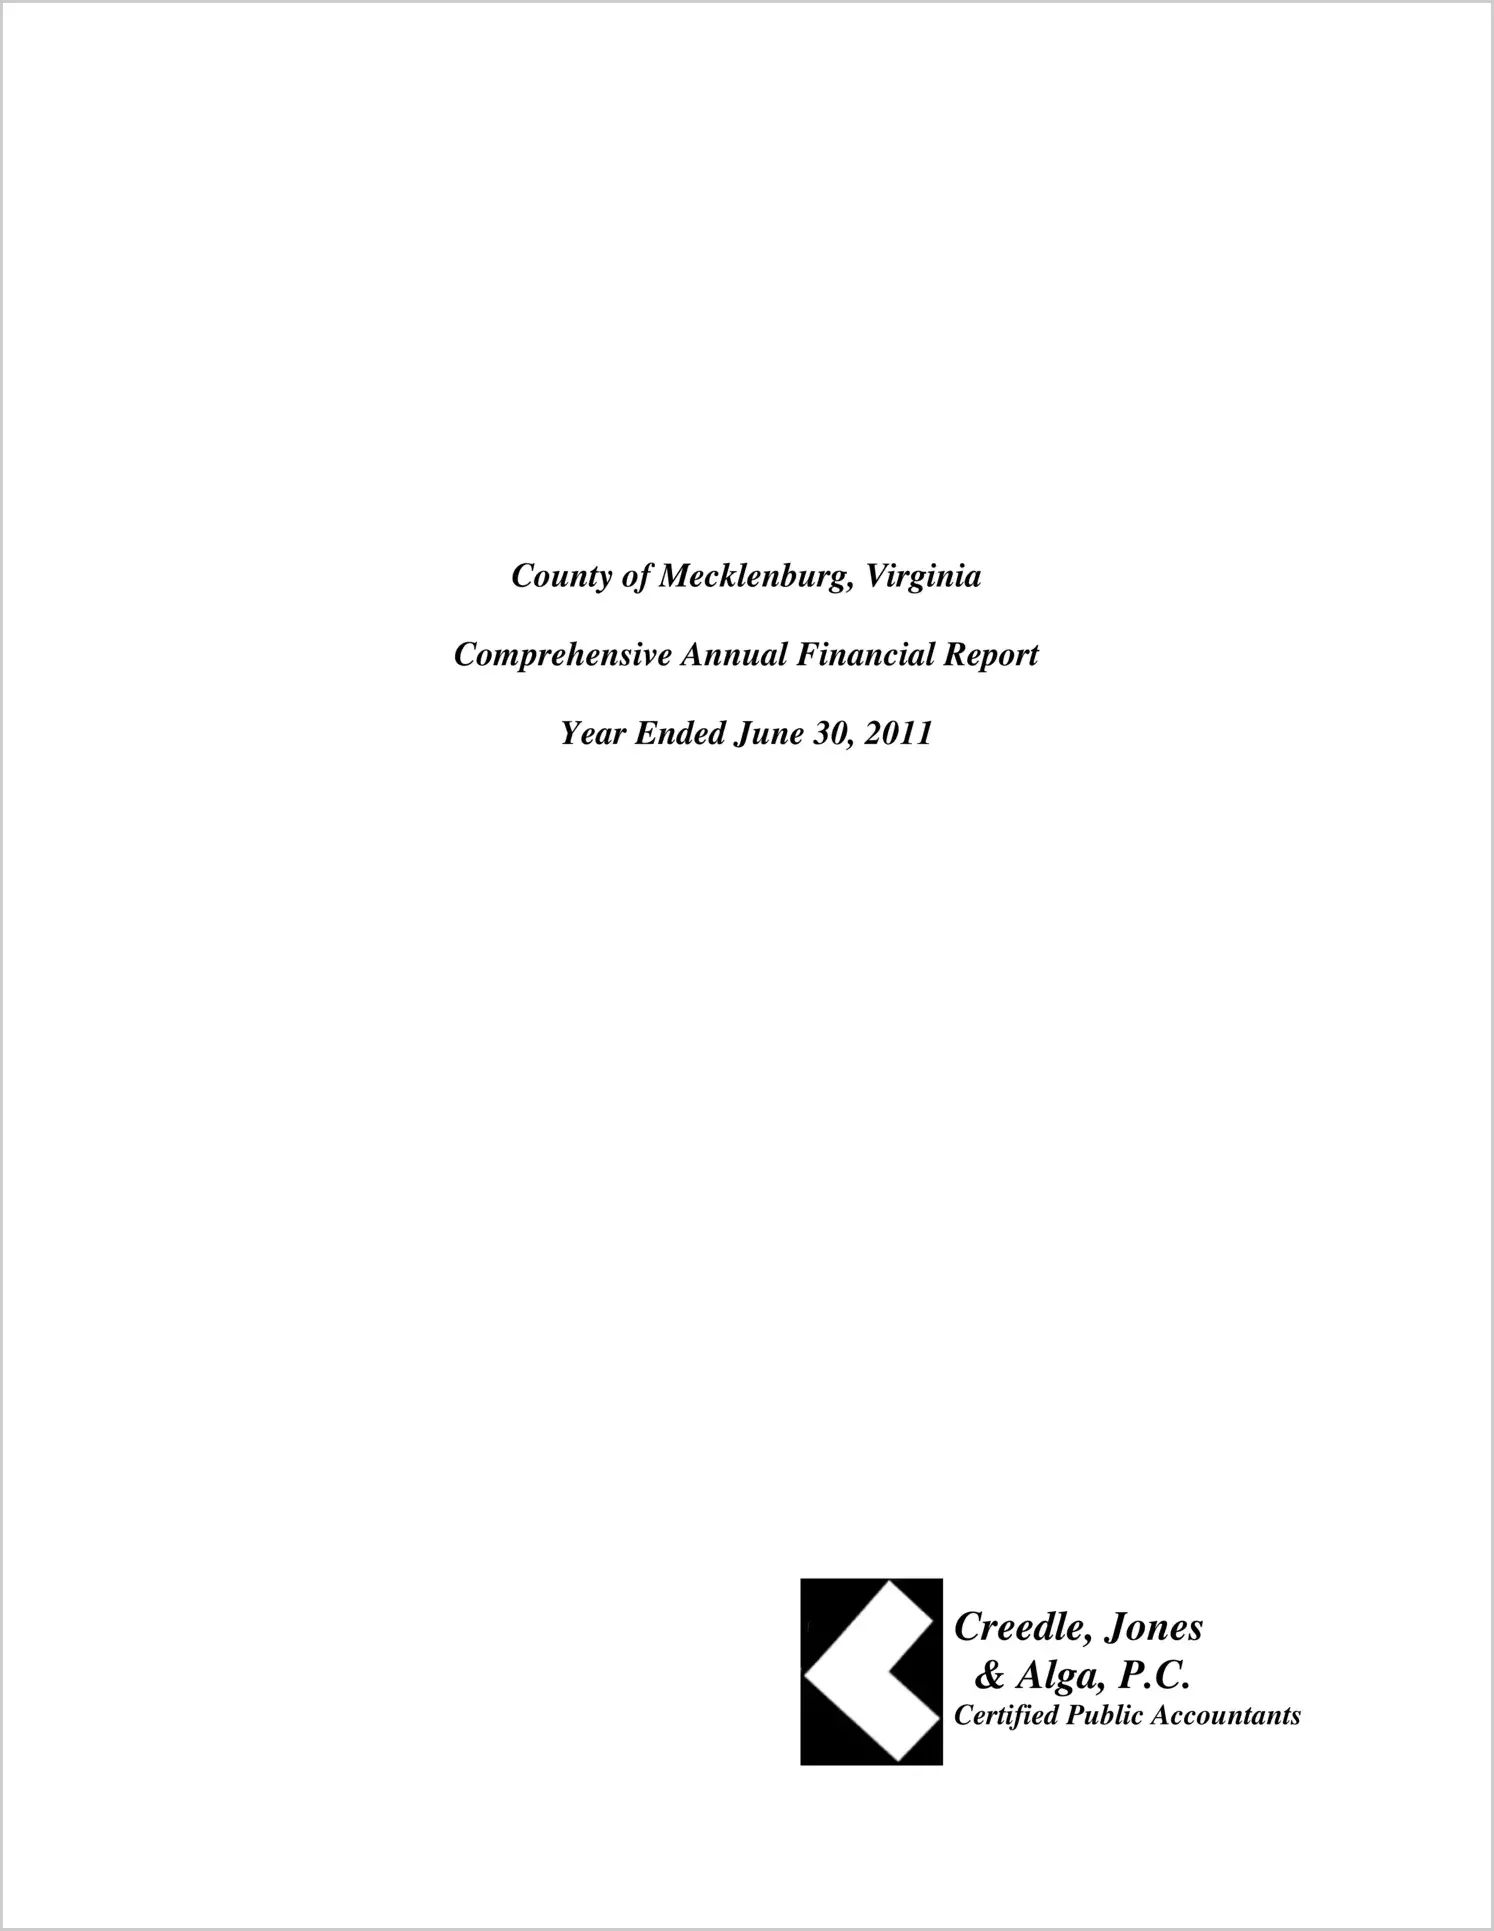 2011 Annual Financial Report for County of Mecklenburg